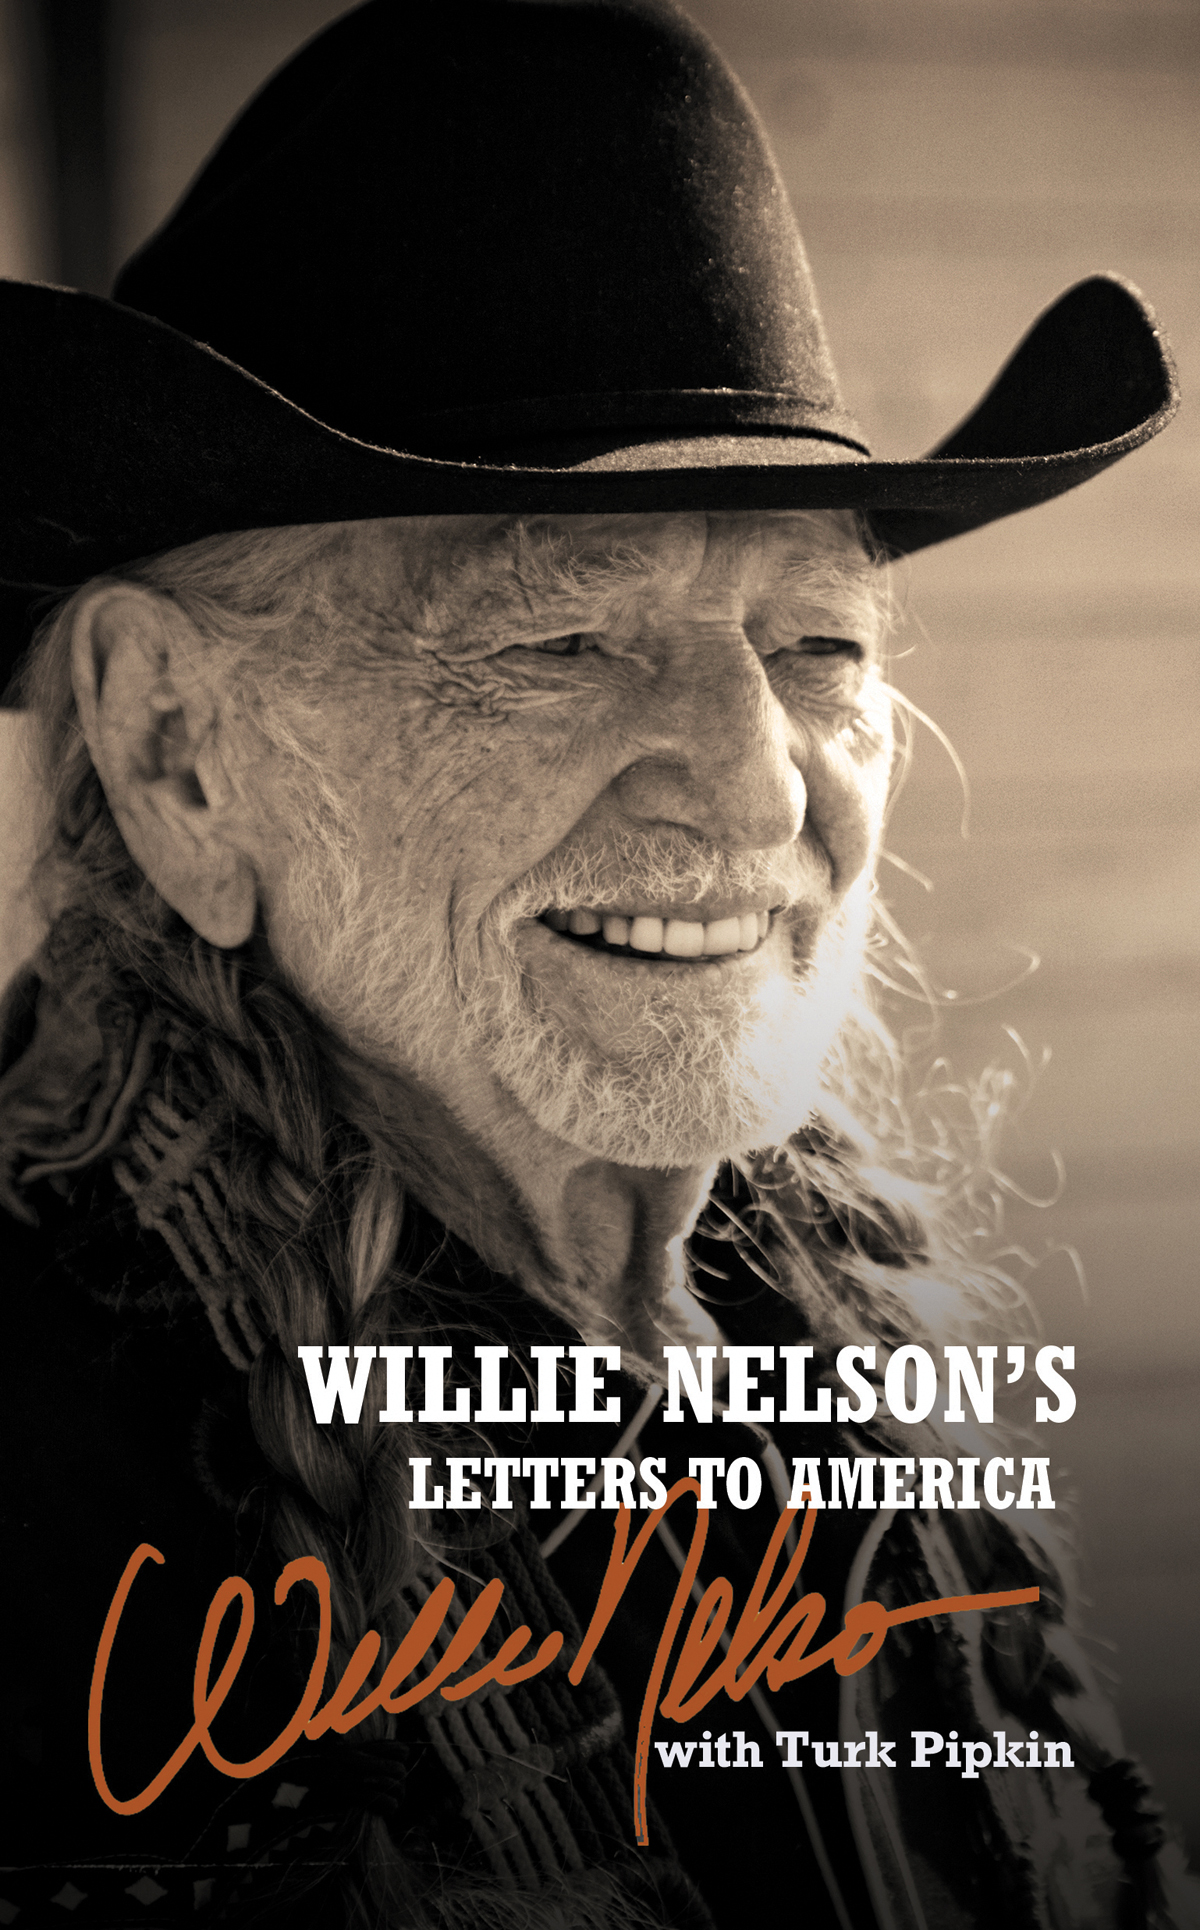 Willie Nelsons Letters to America Copyright 2021 by Willie Nelson All rights - photo 1